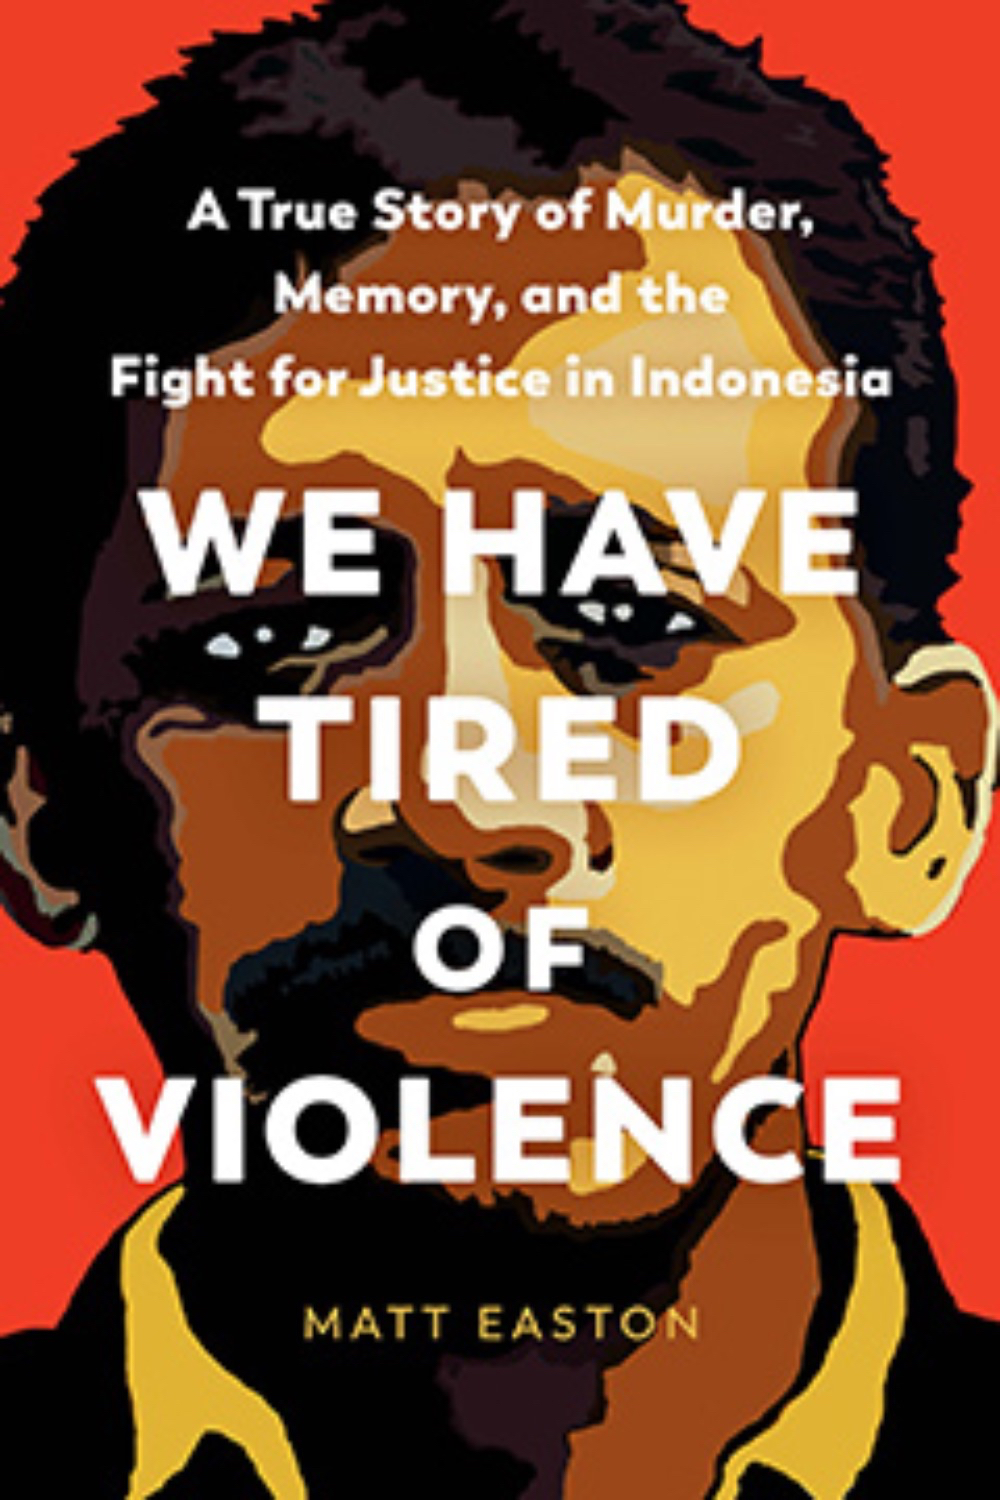 We Have Tired of Violence by Matt Easton